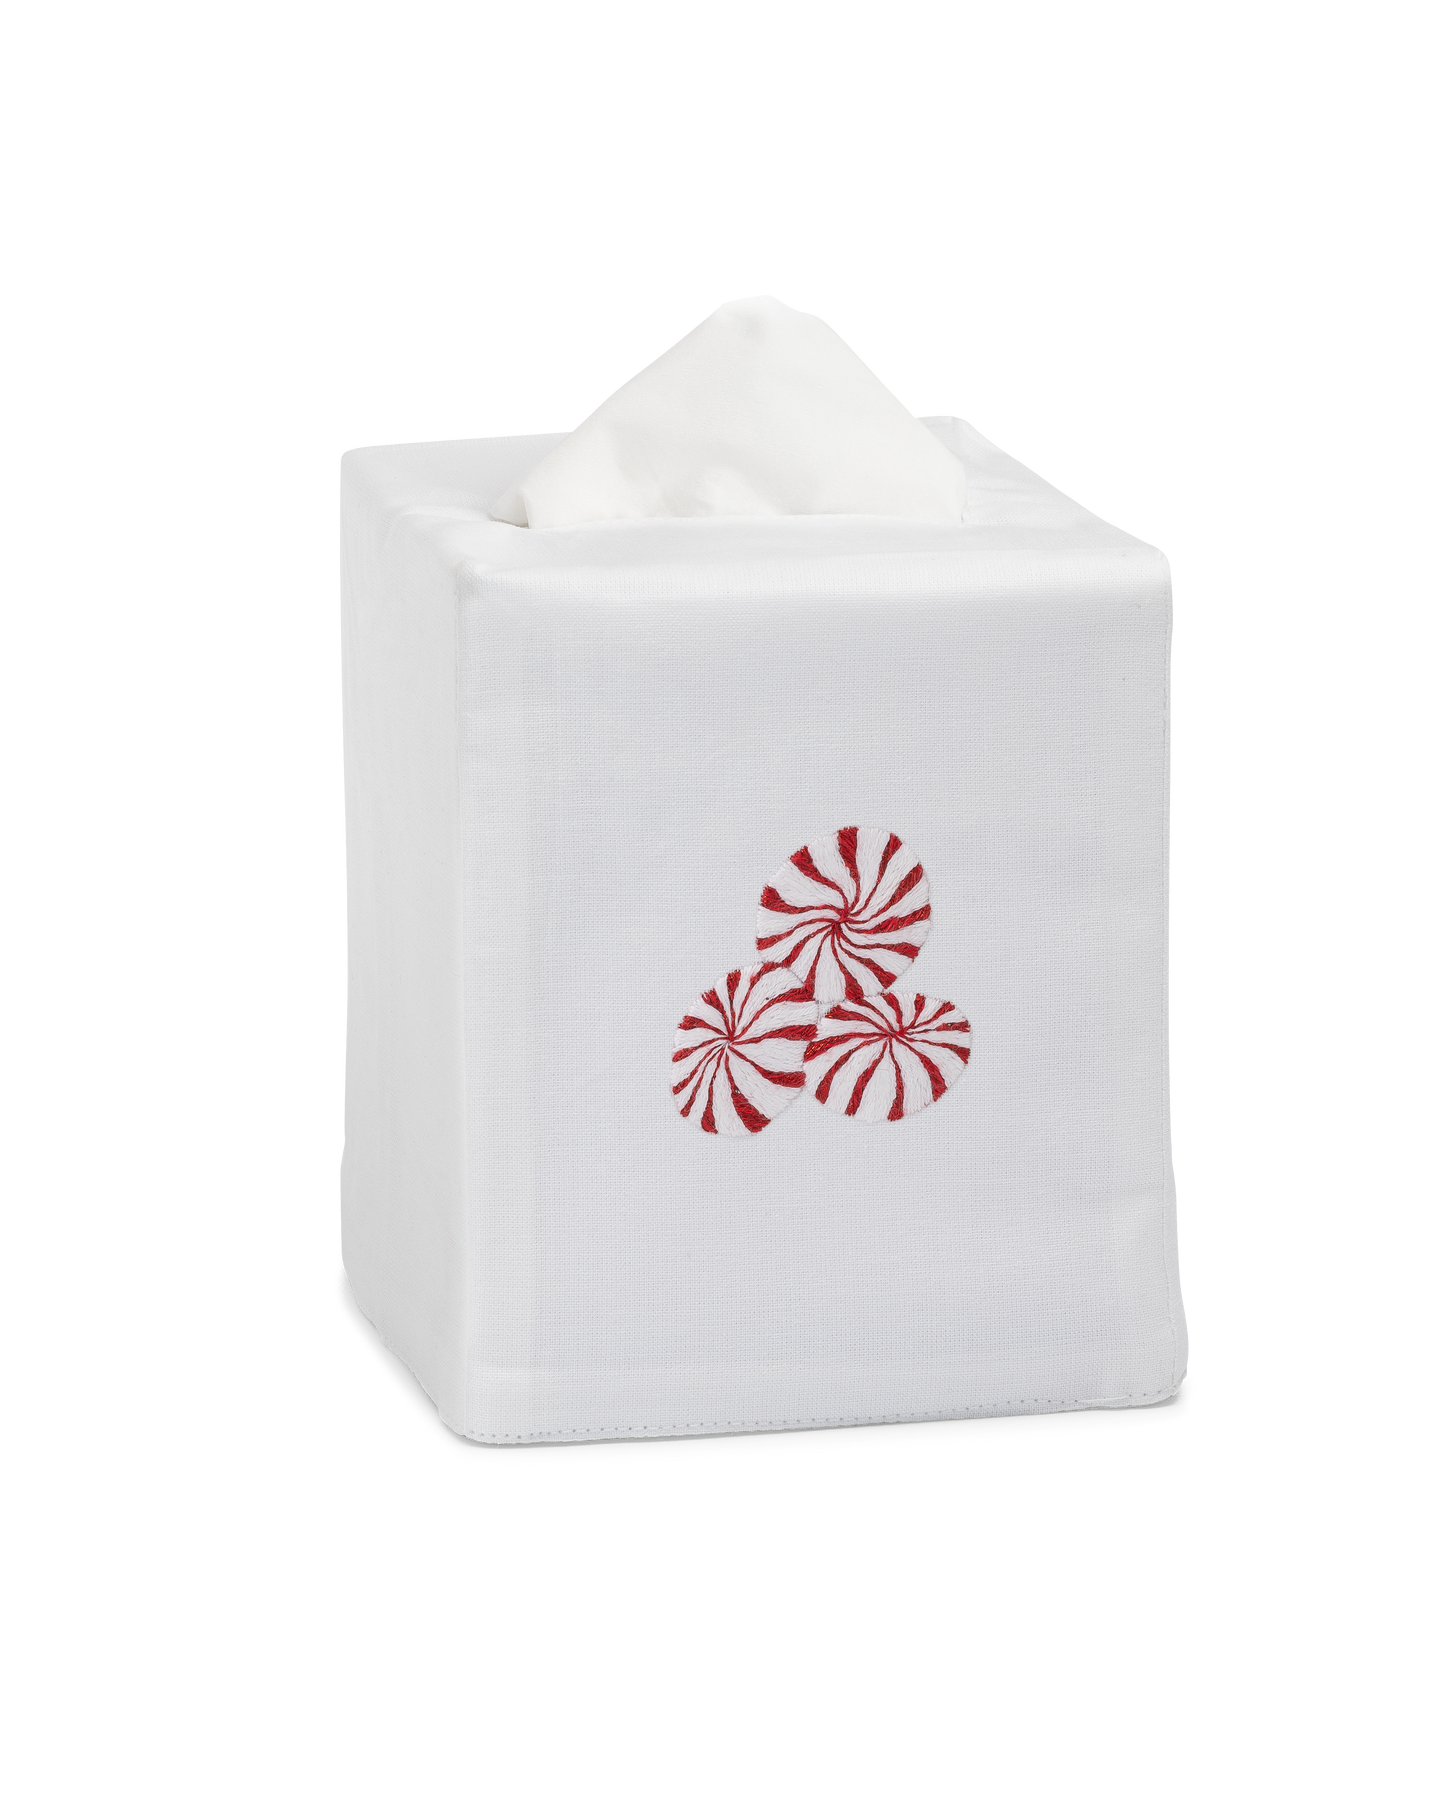 A white tissue cover with three peppermint candies embroidered in the center.